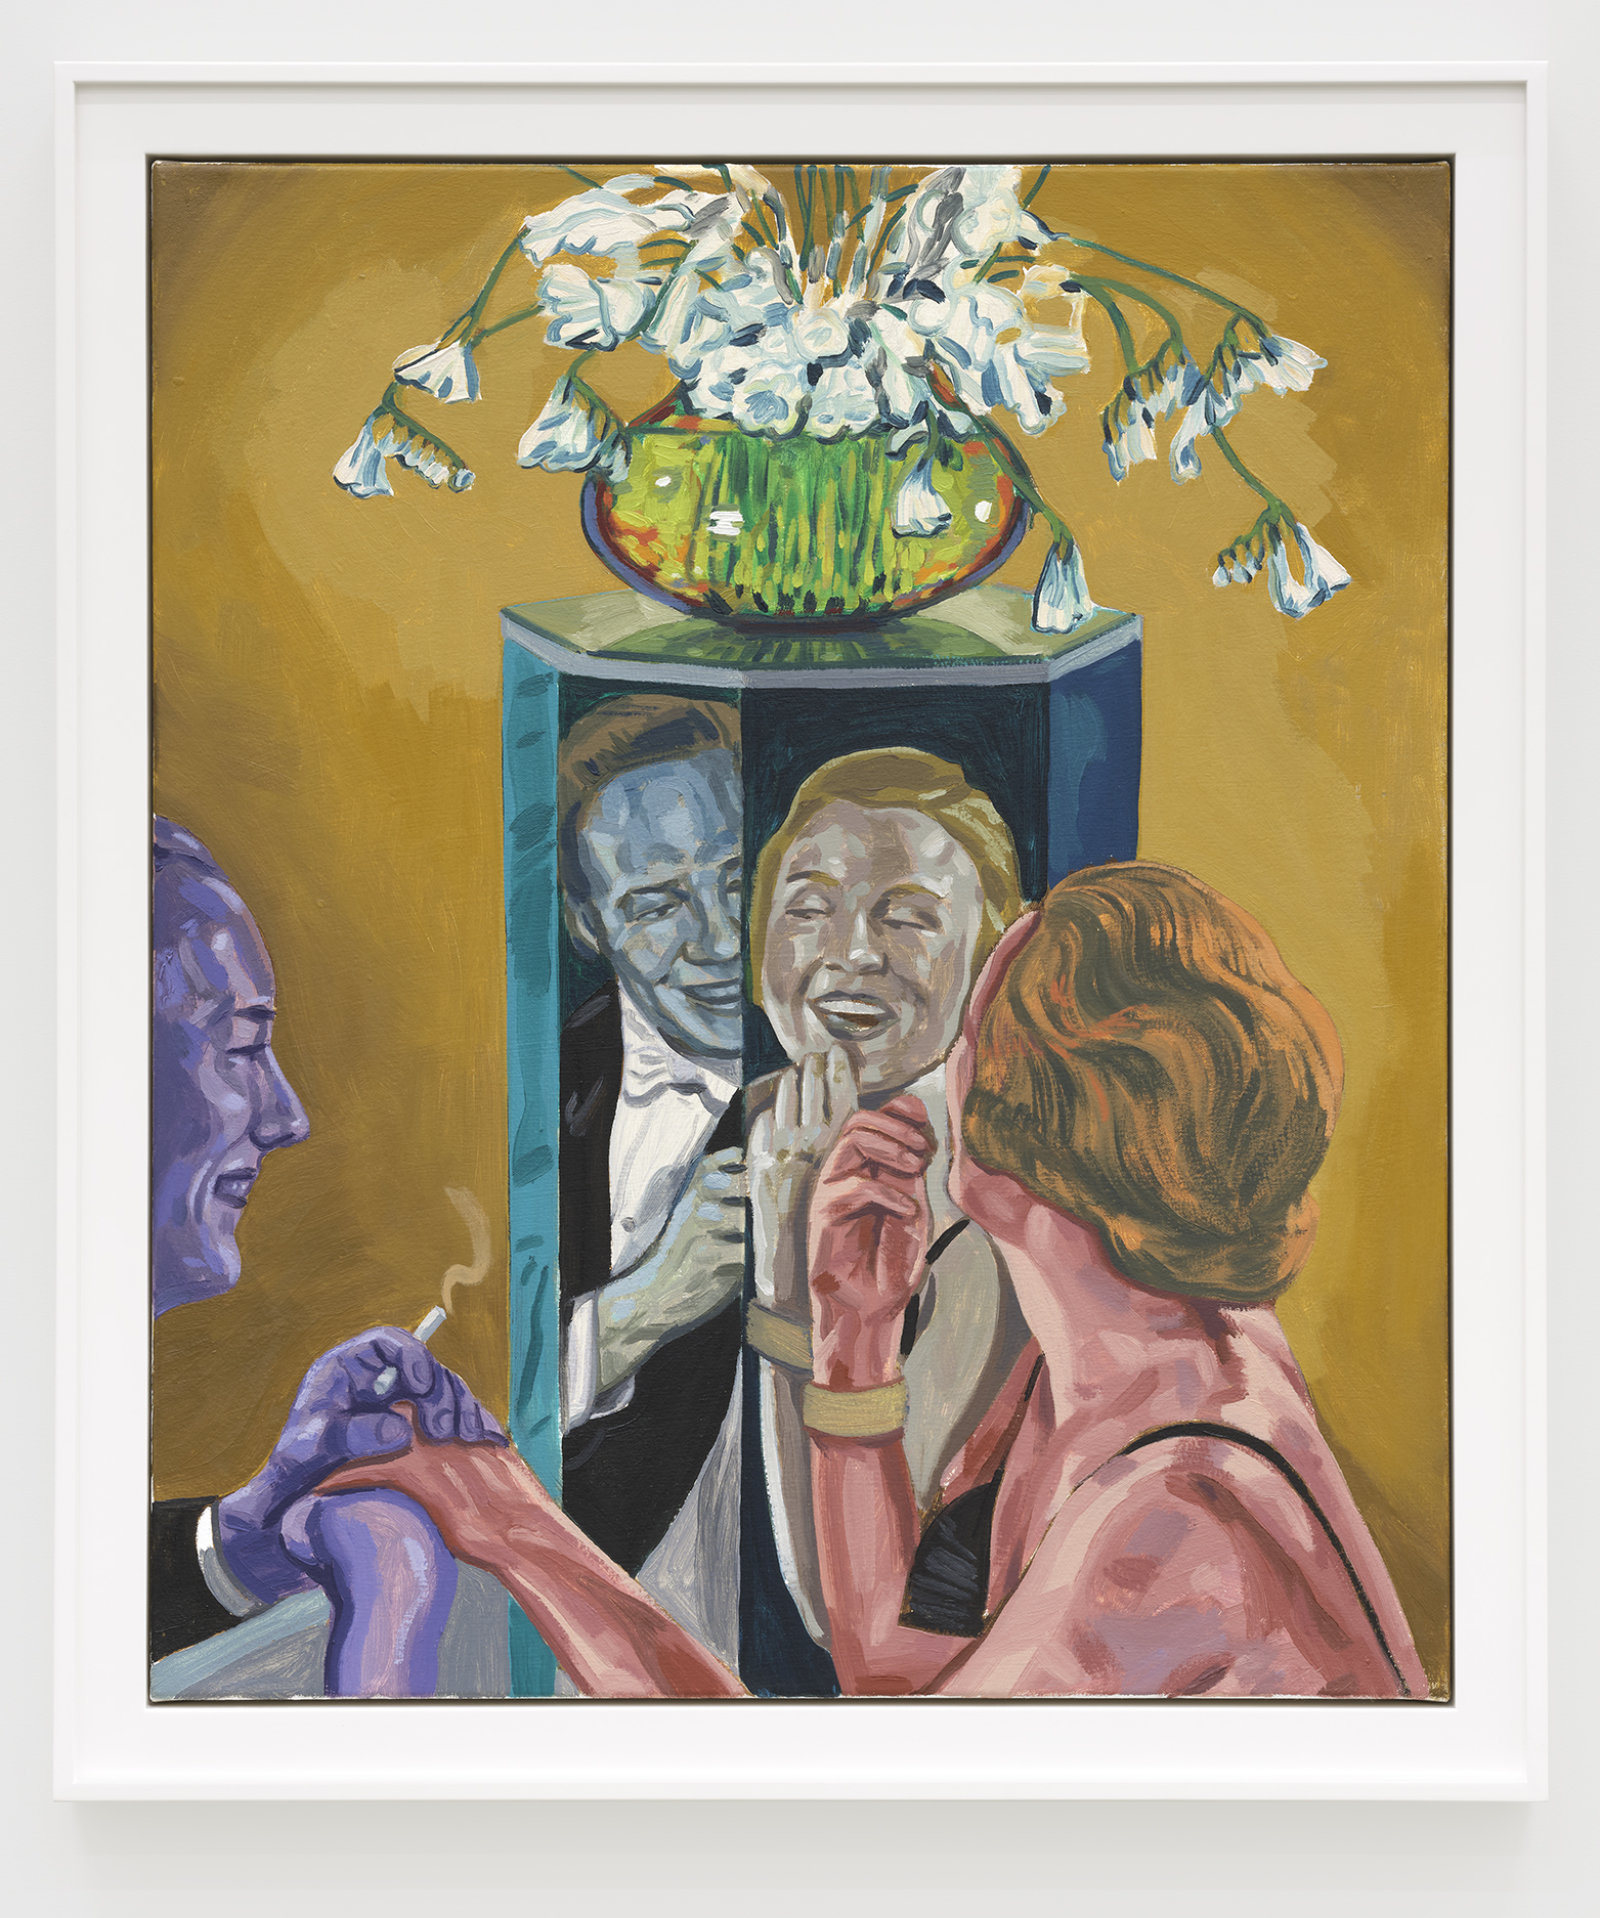 Damian Moppett, Man and Woman in Mirror, 2020, oil on canvas, 36 x 31 in. (92 x 79 cm)